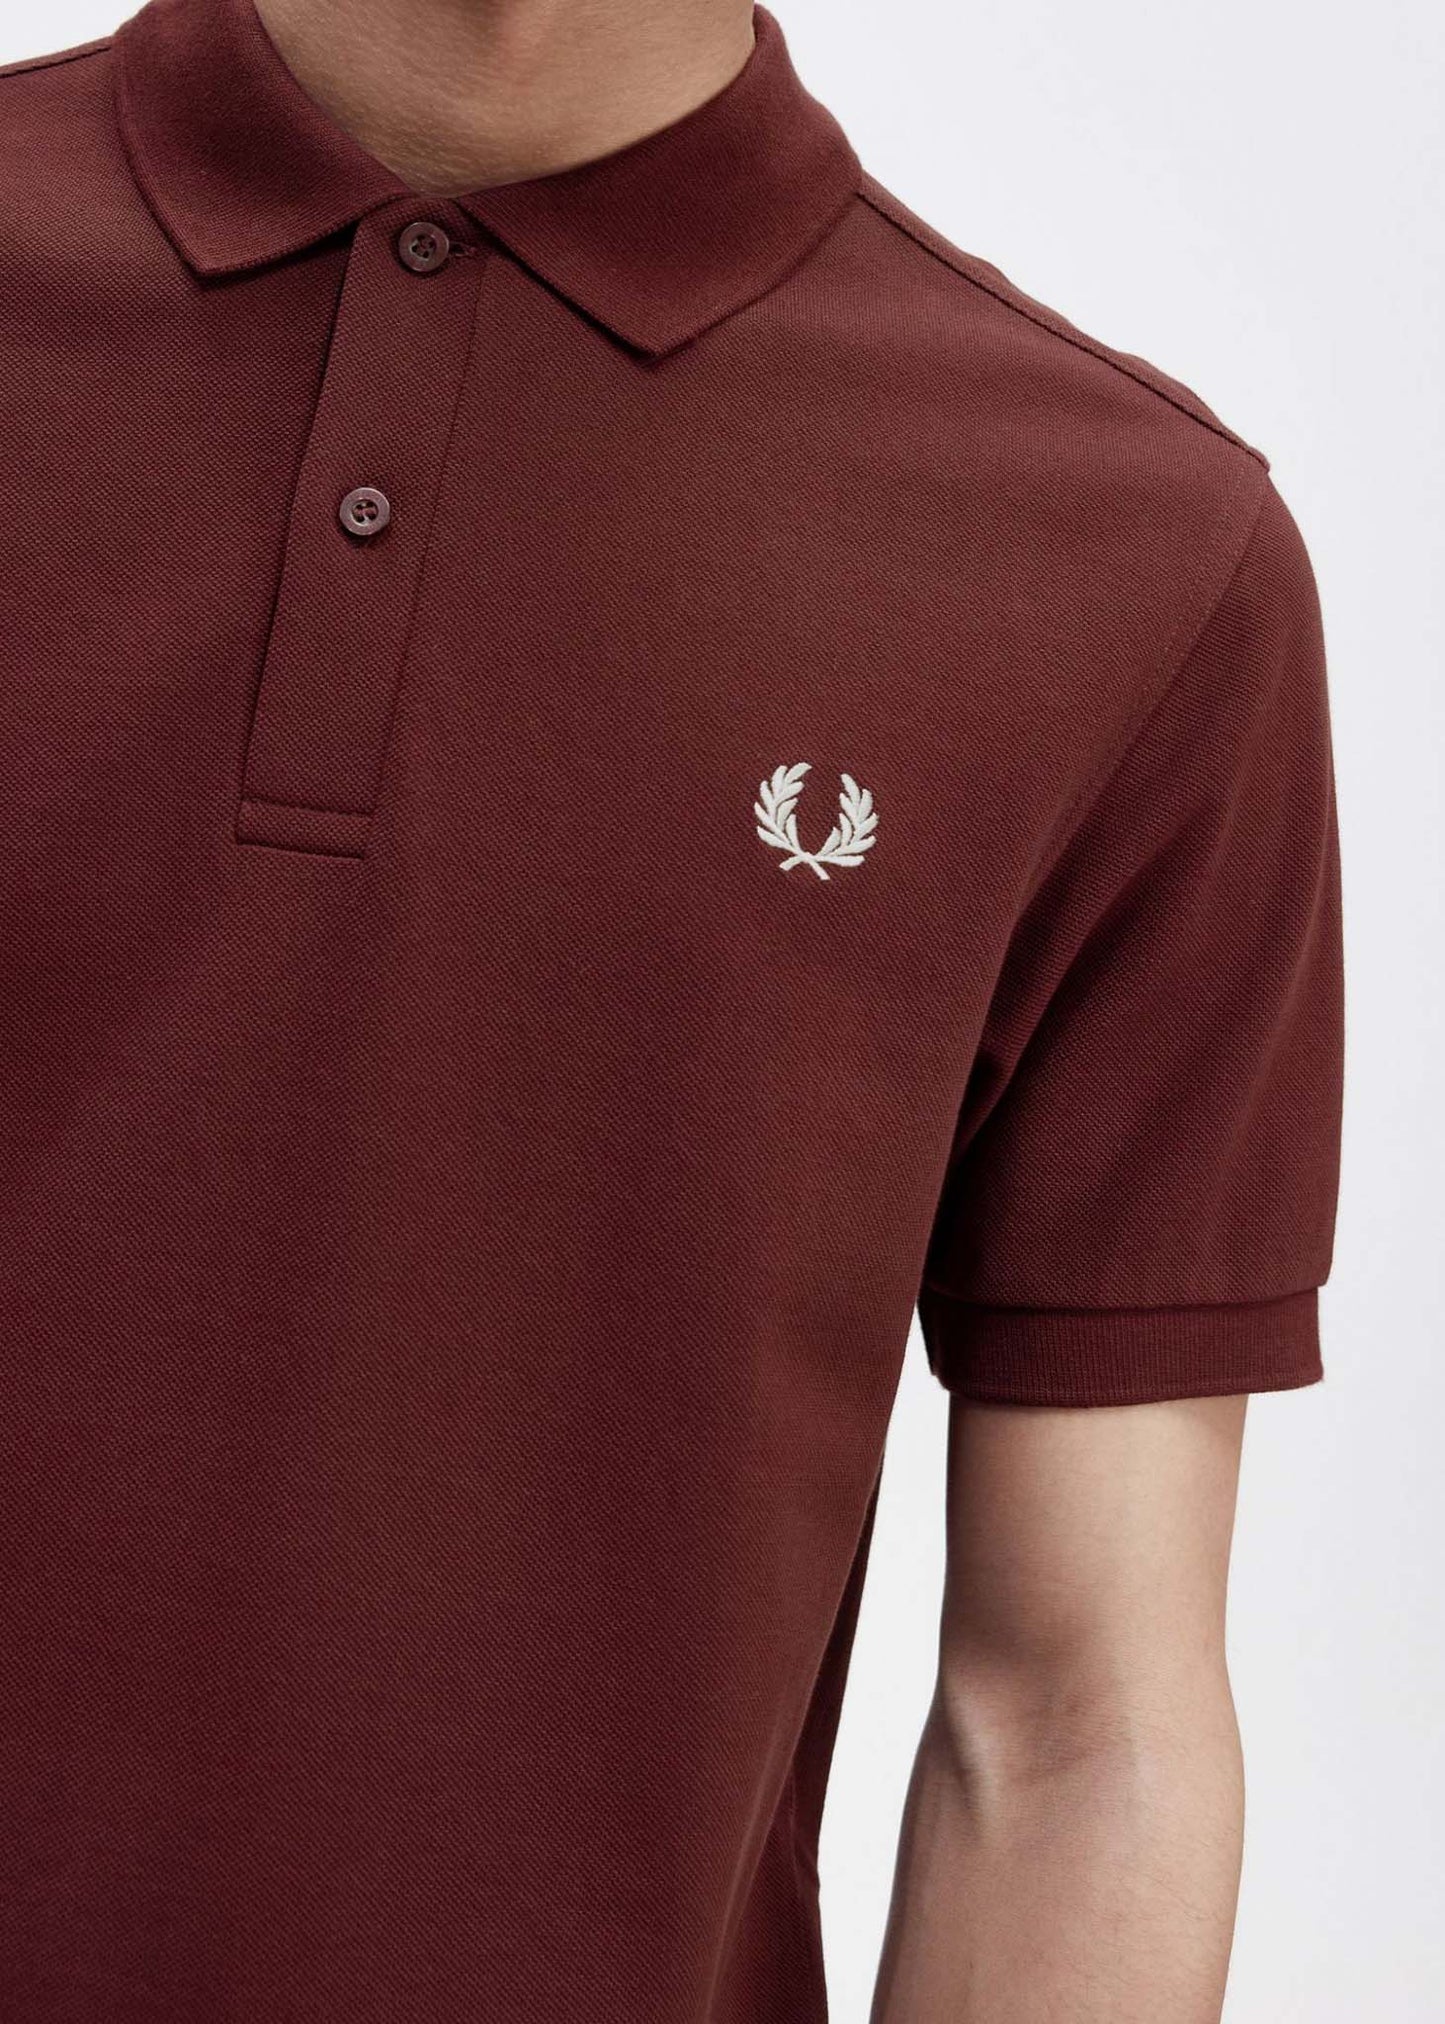 Plain fred perry shirt - oxblood